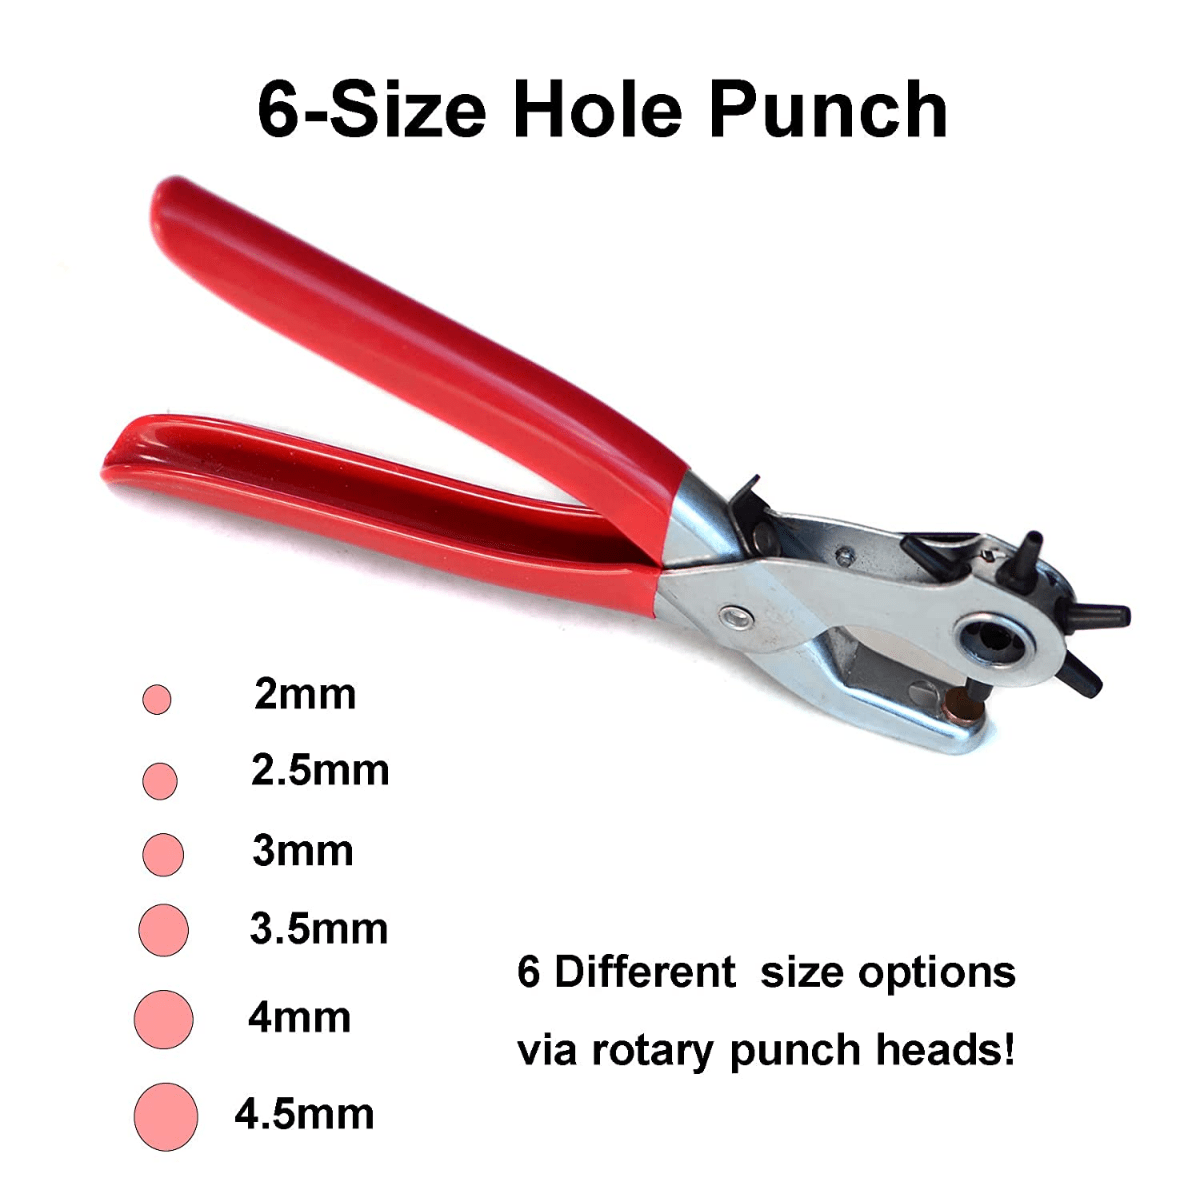 Langtuo 9inch Leather Hole Punch, 6 Size Leather Hole Punch for Belts, Belt Puncher for Leather, Belts, Watches, Plastic, Handbags Multi Hole Sizes